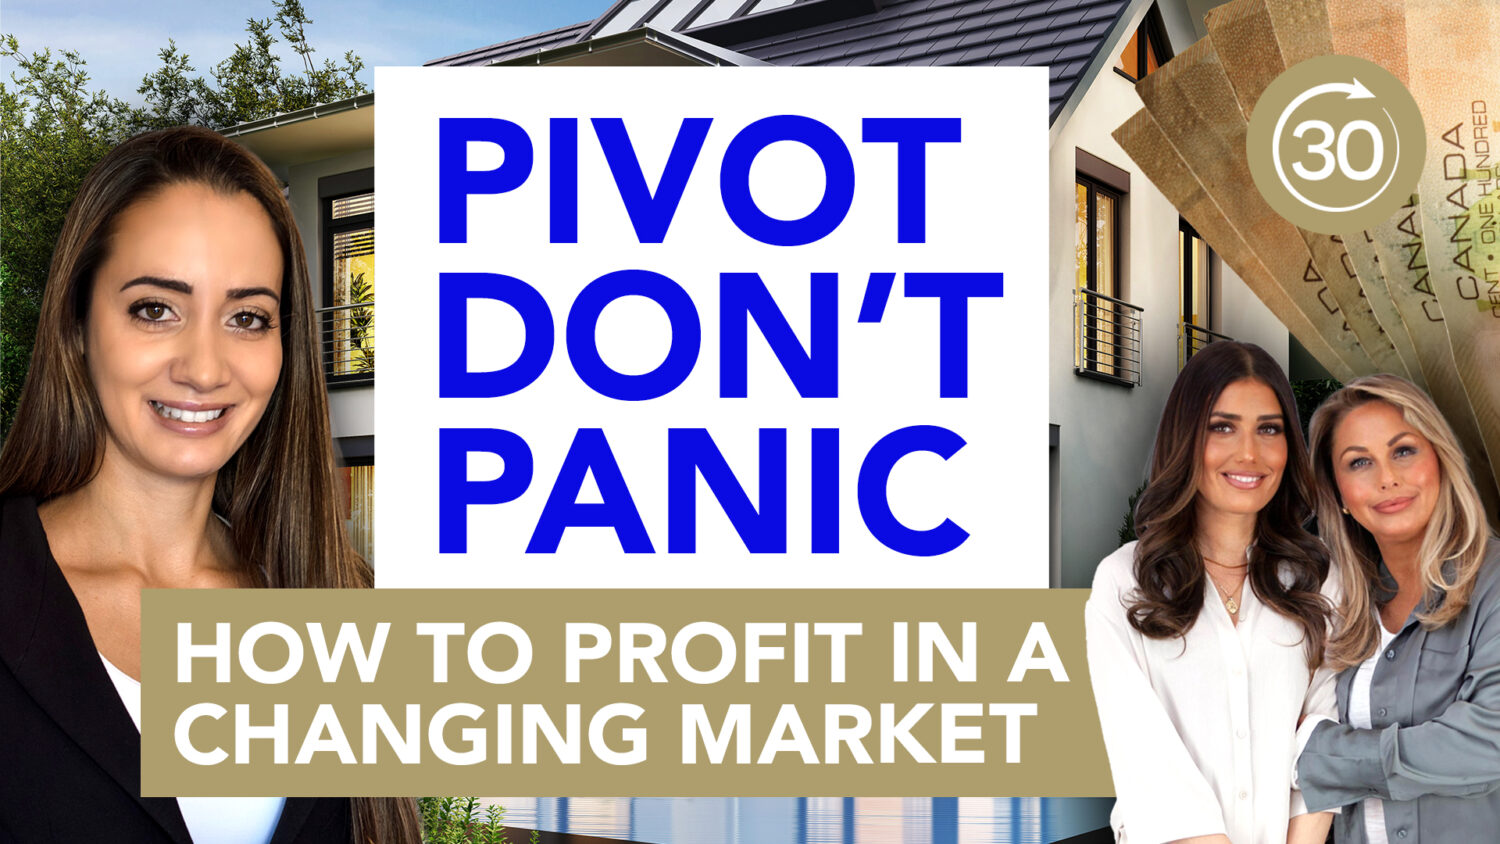 S6 E1 - Pivot, Don’t Panic: How to Profit in A Changing Market